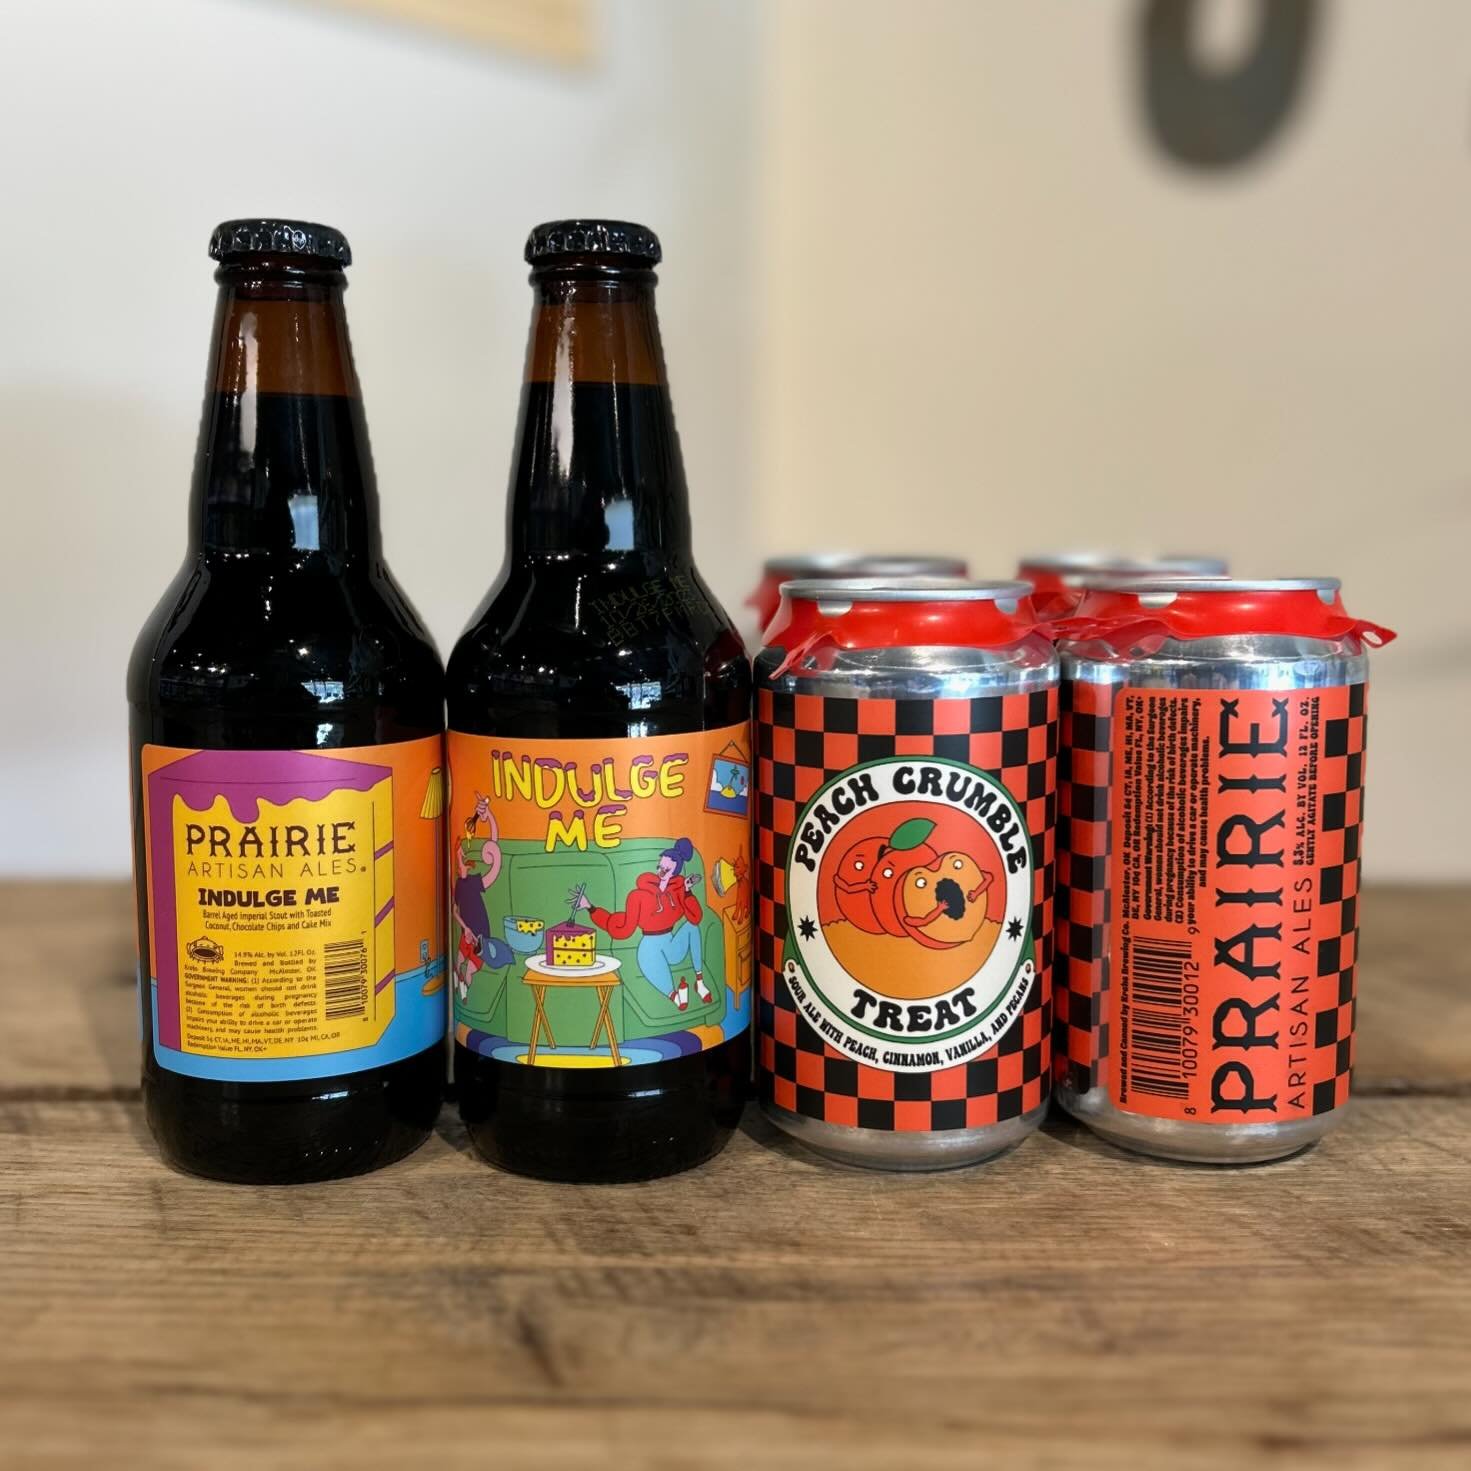 Welcoming @prairieales back to the shop this week #NowAvailable #SudburyCraftBeer #SudburyMA
&mdash;
INDULGE ME

Bourbon Barrel Aged Imperial Stout (14.9% ABV)
TOASTED COCONUT + CHOCOLATE CHIPS + CAKE MIX
&mdash;
PEACH CRUMBLE TREAT

Sour Ale (5.3% A